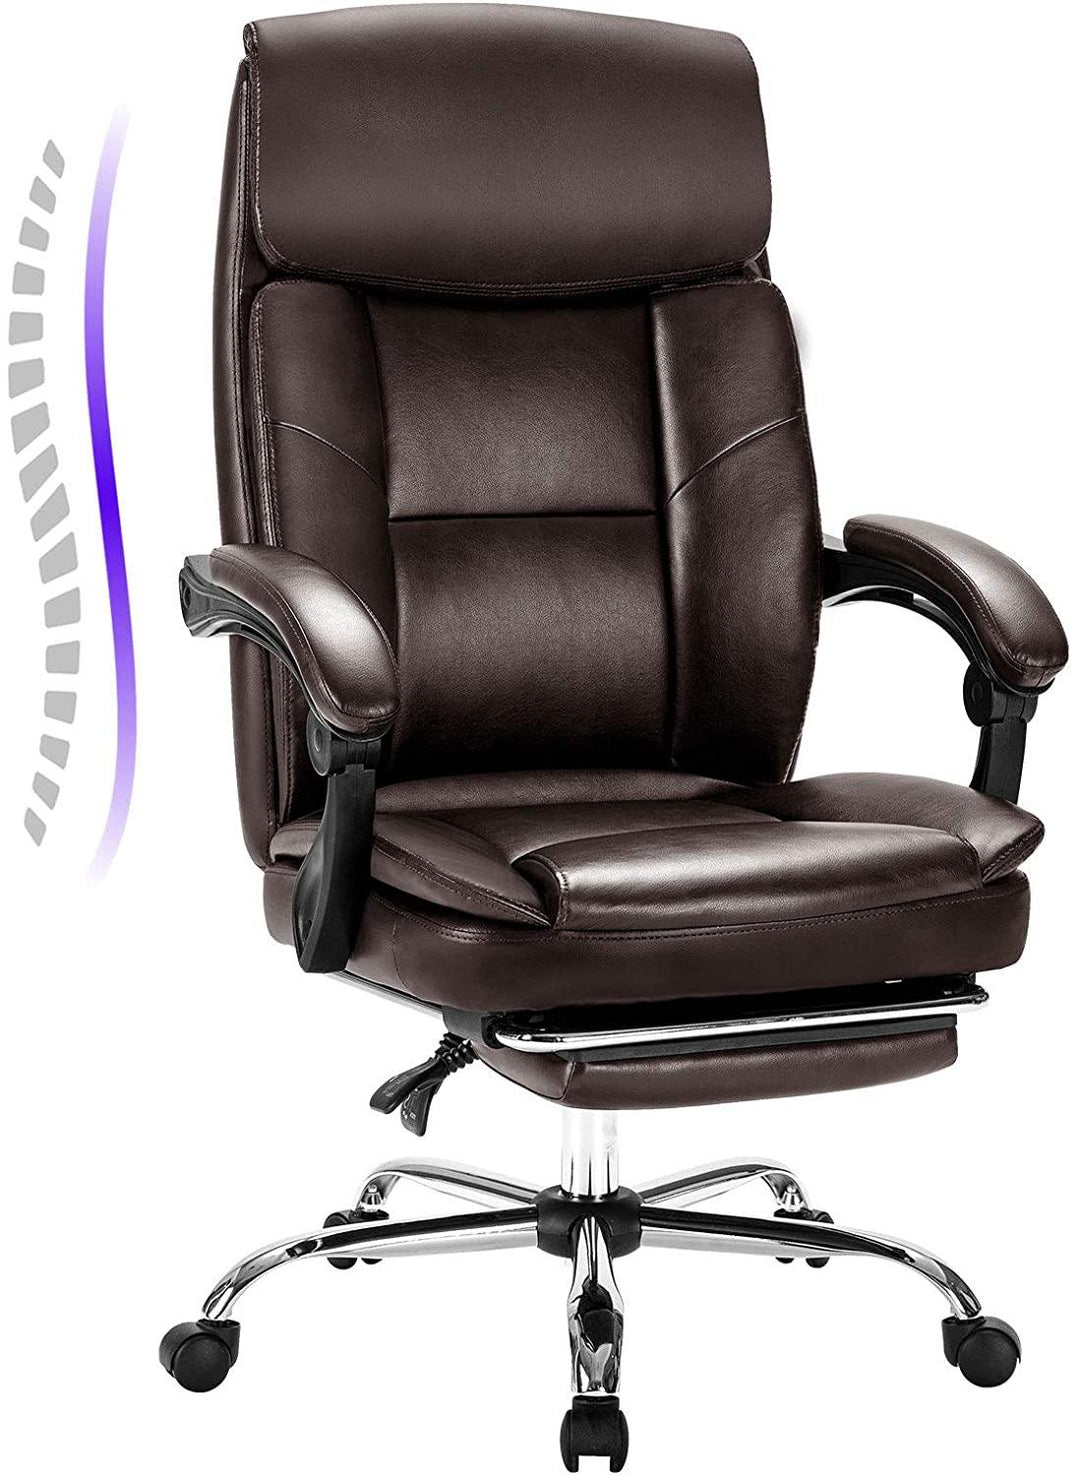 Rimiking Big & Tall Office Chair with Footrest- Bonded Leather Desk Chair Swivel Rolling High Back Computer Chair Adjustable Ergonomic Task Chair Black/Brown - Trendha